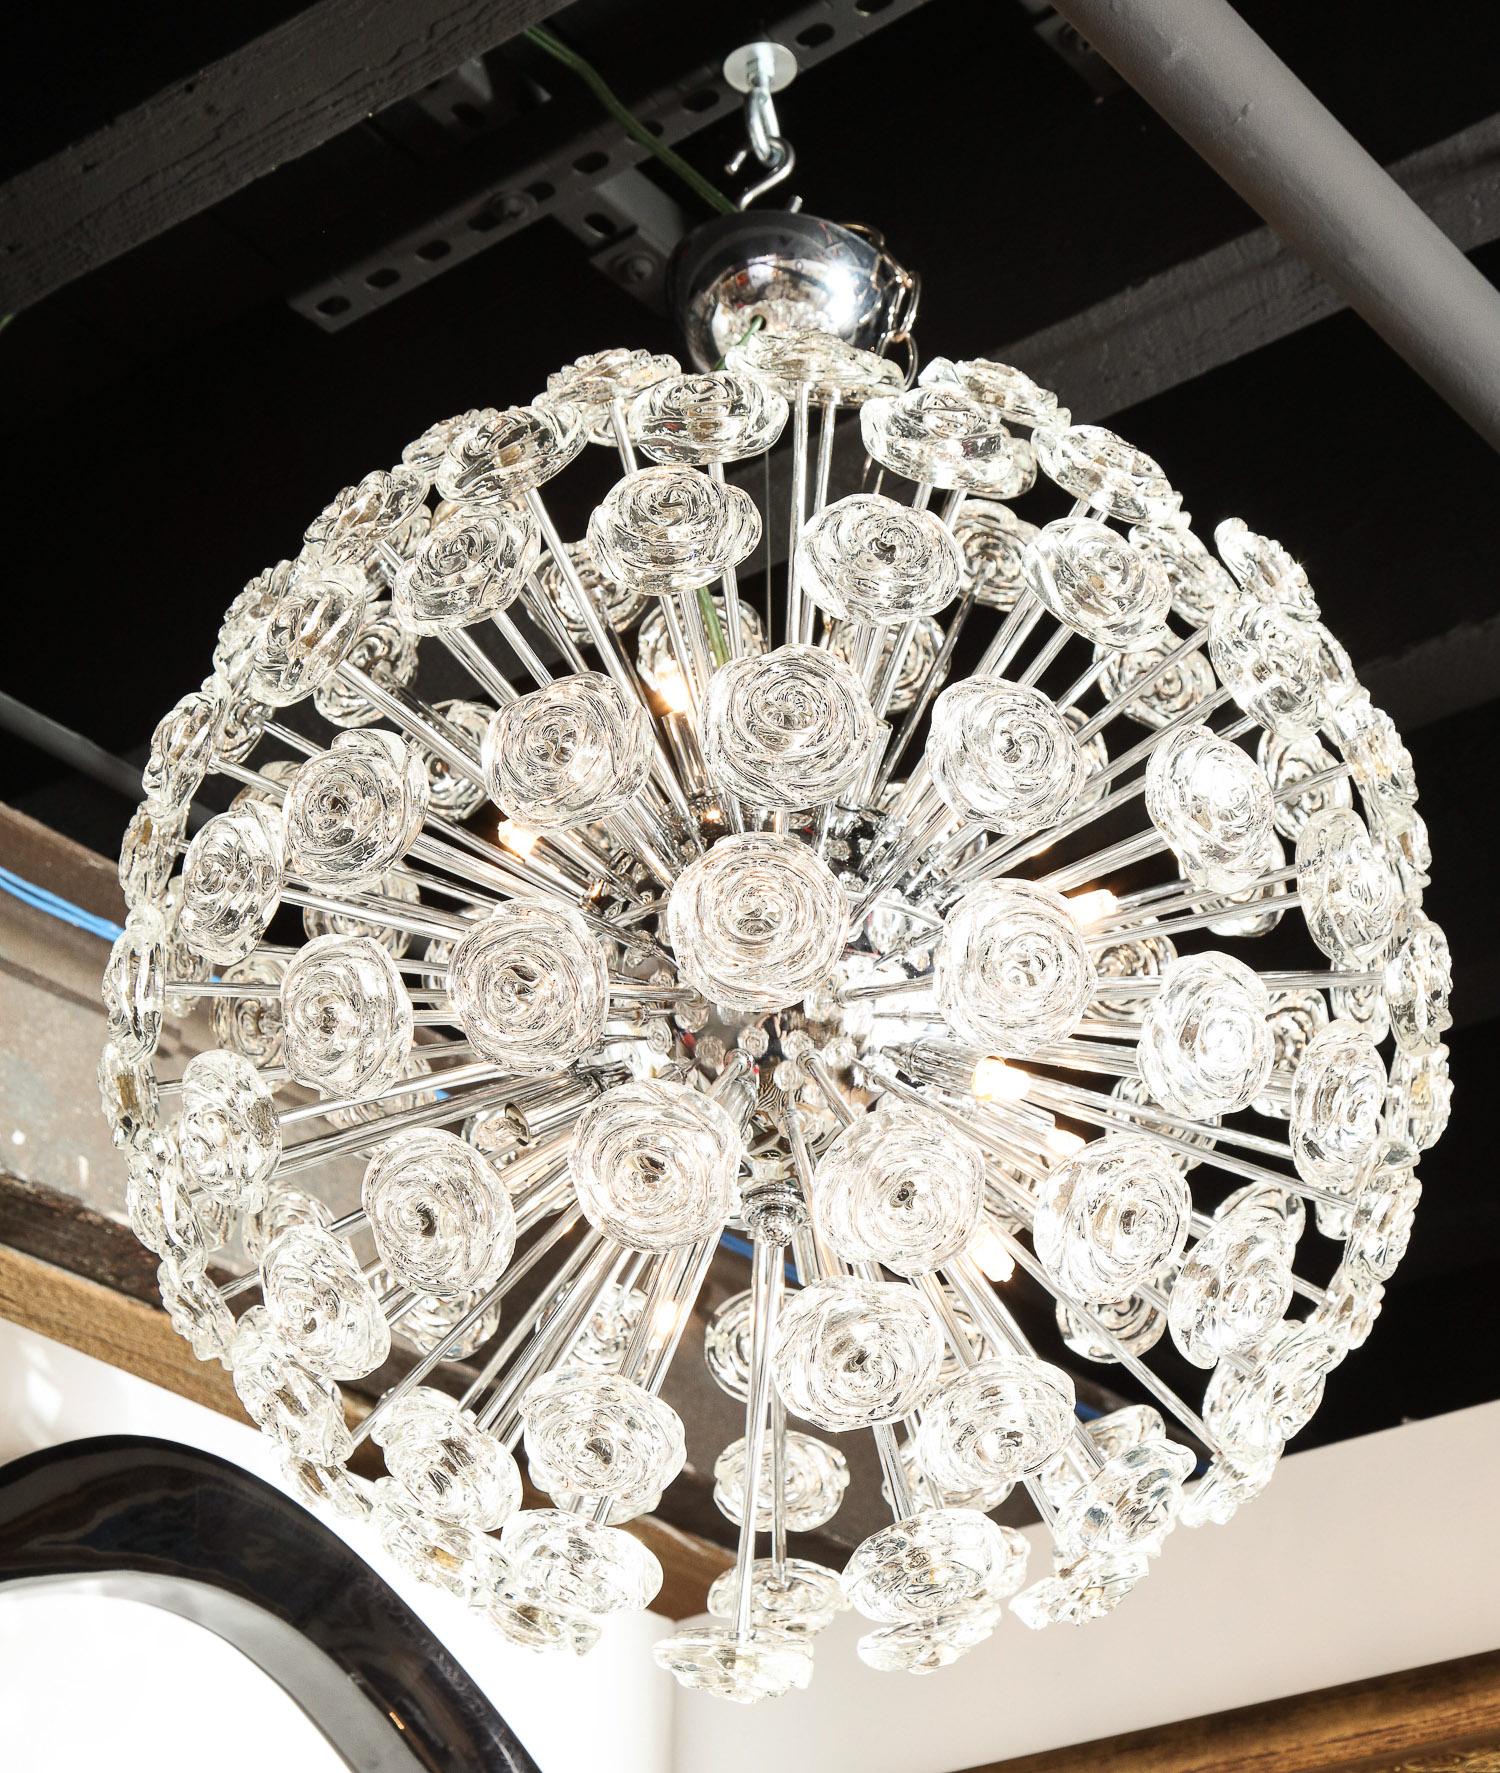 Mid-Century Modern Chandelier with Glass Roses, Midcentury Design, Italy, Large Chrome Sphere For Sale